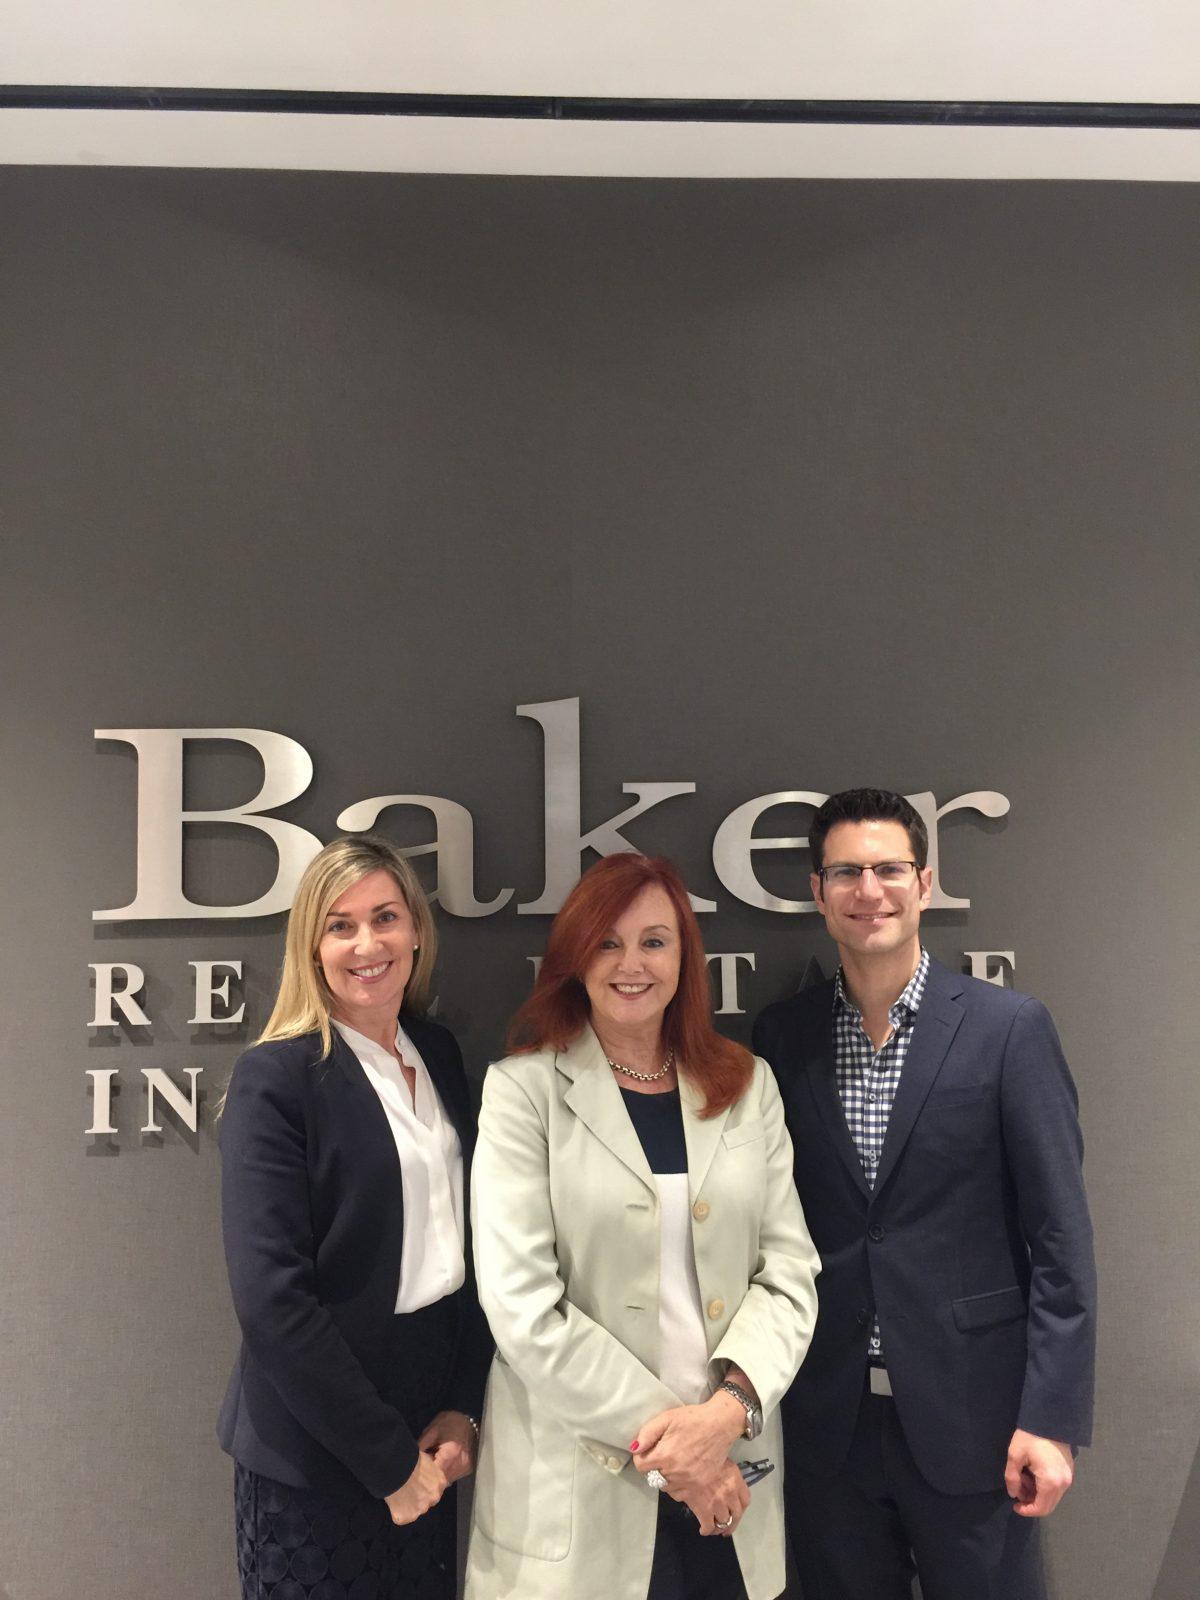 (L to R) Debbie Lafave, senior vice president of Baker Real Estate, Barbara Lawlor, CEO and president, and vice president Harley Nakelsky. (Courtesy of Baker Real Estate)